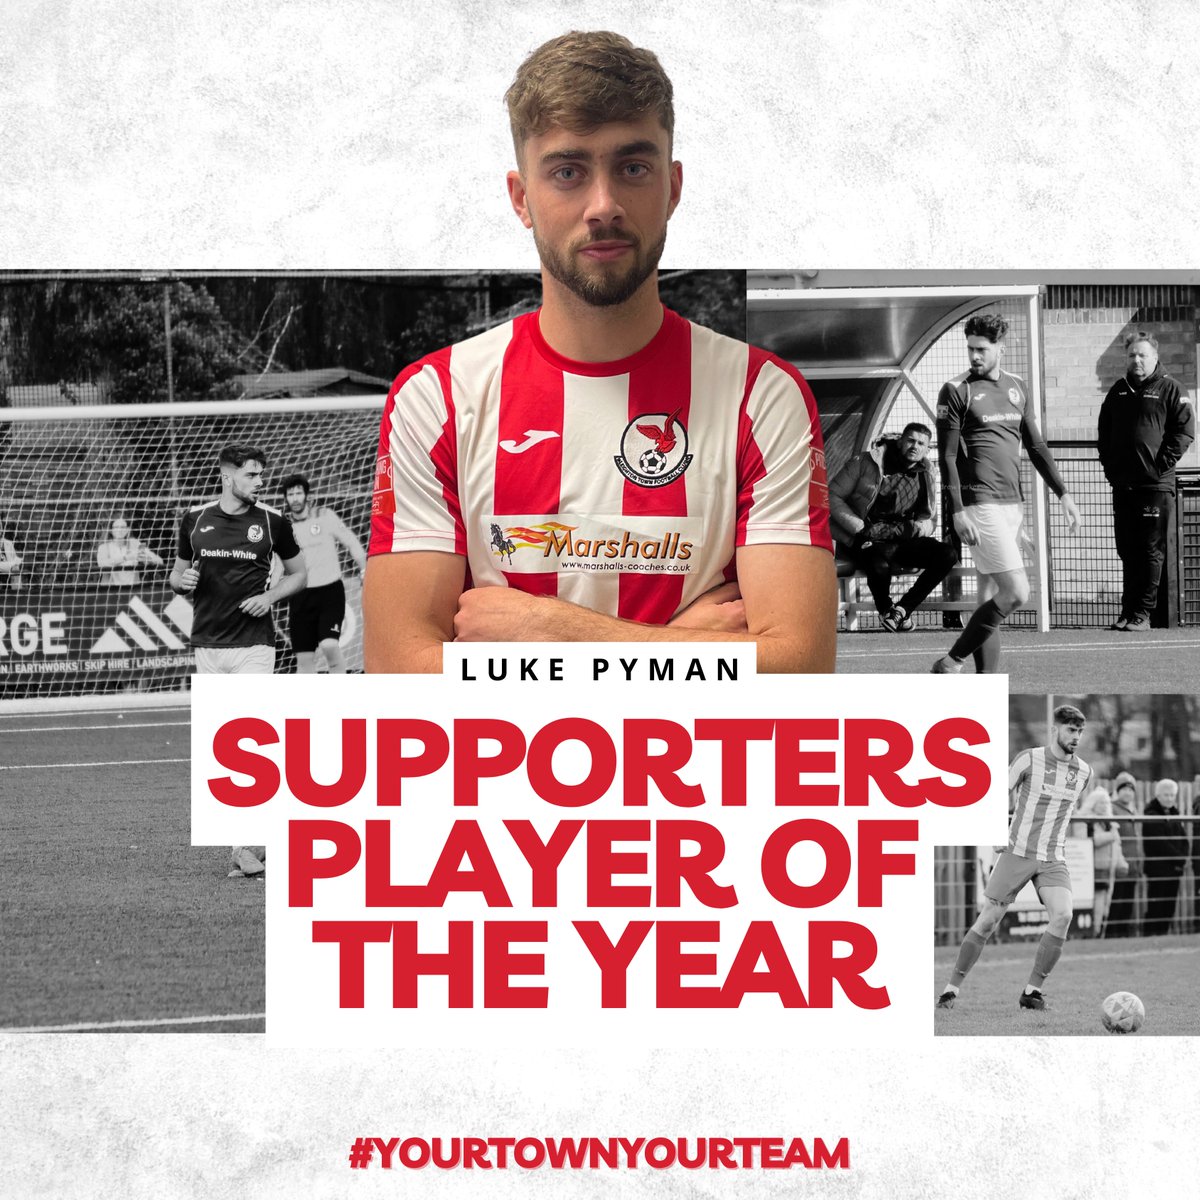 𝙎𝙐𝙋𝙋𝙊𝙍𝙏𝙀𝙍𝙎 𝙋𝙇𝘼𝙔𝙀𝙍 𝙊𝙁 𝙏𝙃𝙀 𝙔𝙀𝘼𝙍 🏆 Last night @lpyman31 won Supporters Player Of The Year 👏 Luke has played every game this year and has been consistent throughout, he has also contributed with some important goals along the way 🫡 #YourTownYourTeam